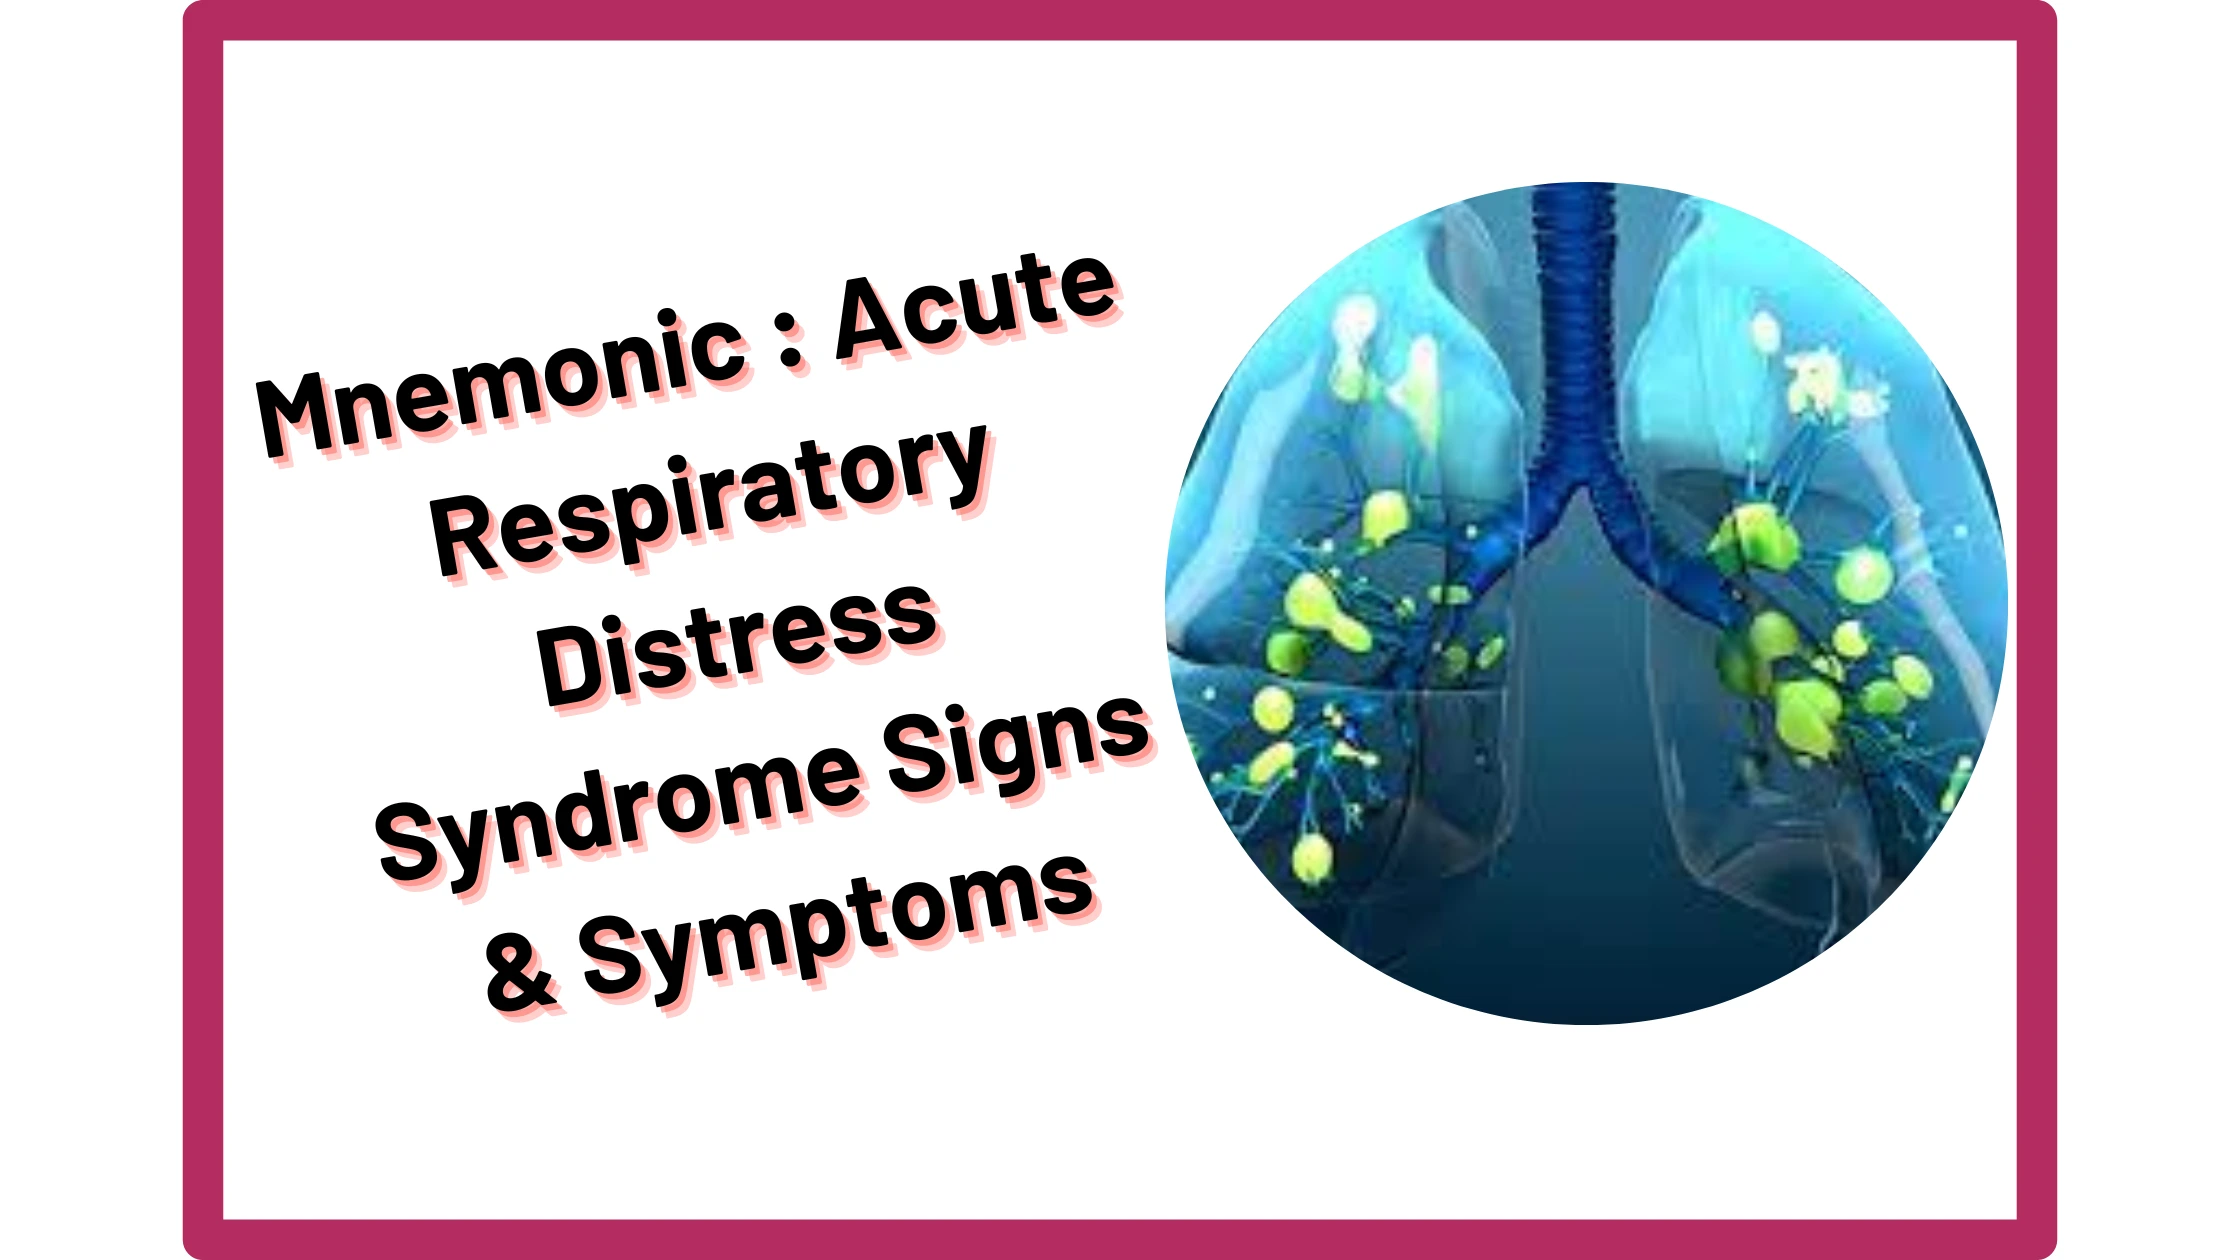 You are currently viewing [Very Cool] Mnemonic : Acute Respiratory Distress Syndrome Signs & Symptoms